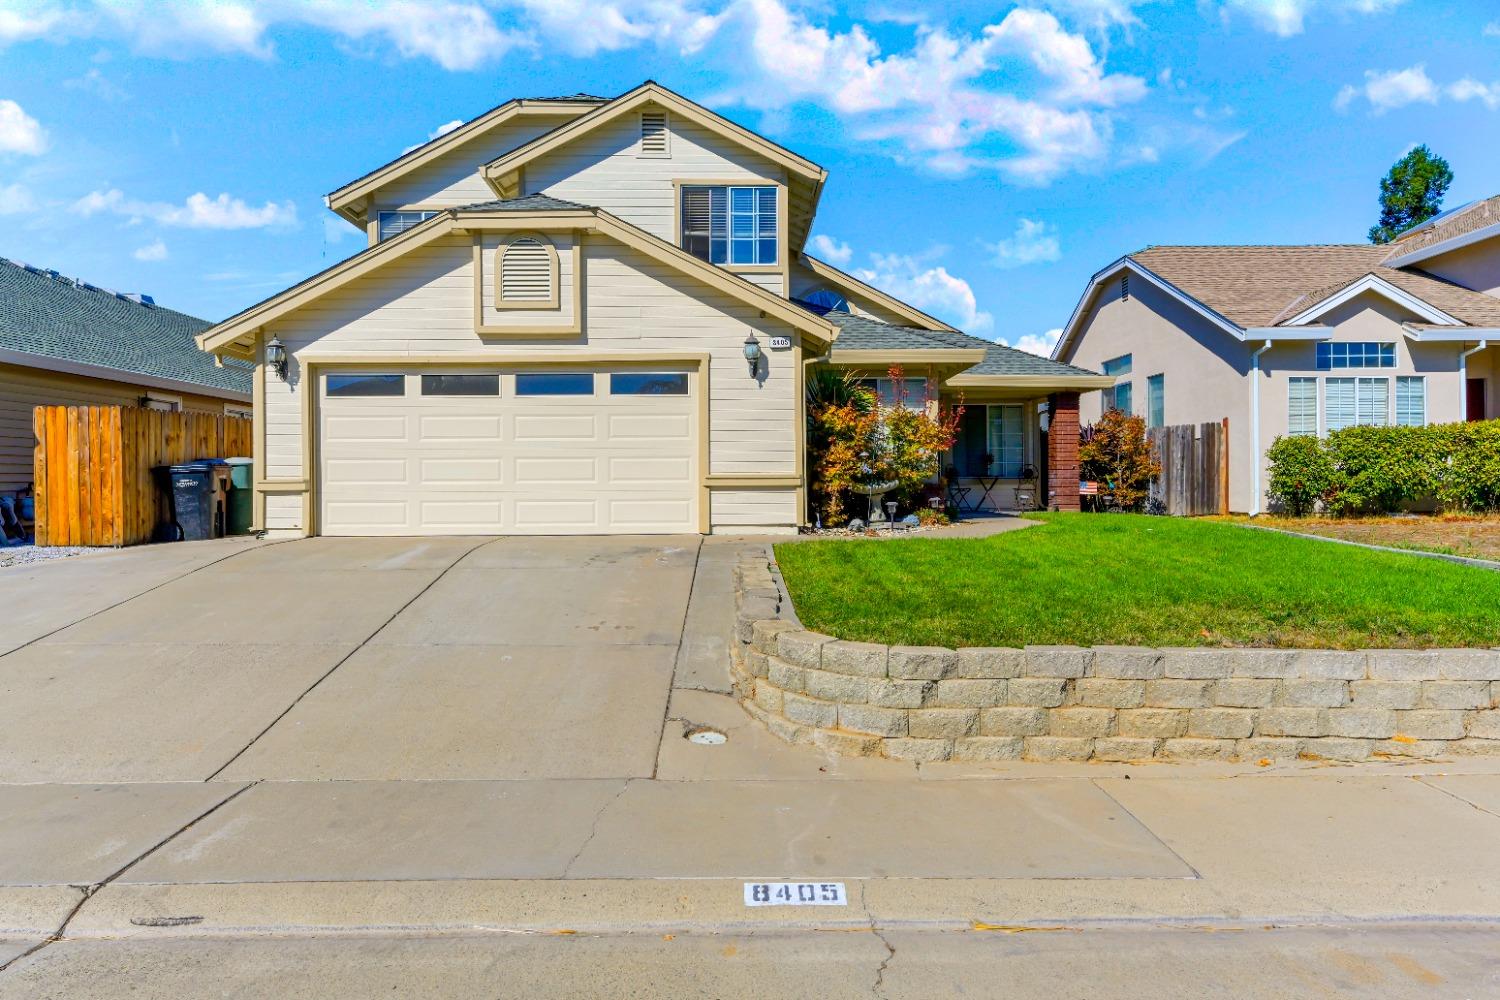 Welcome to this charming two story home in highly rated Elk Grove School District. Home has been upg